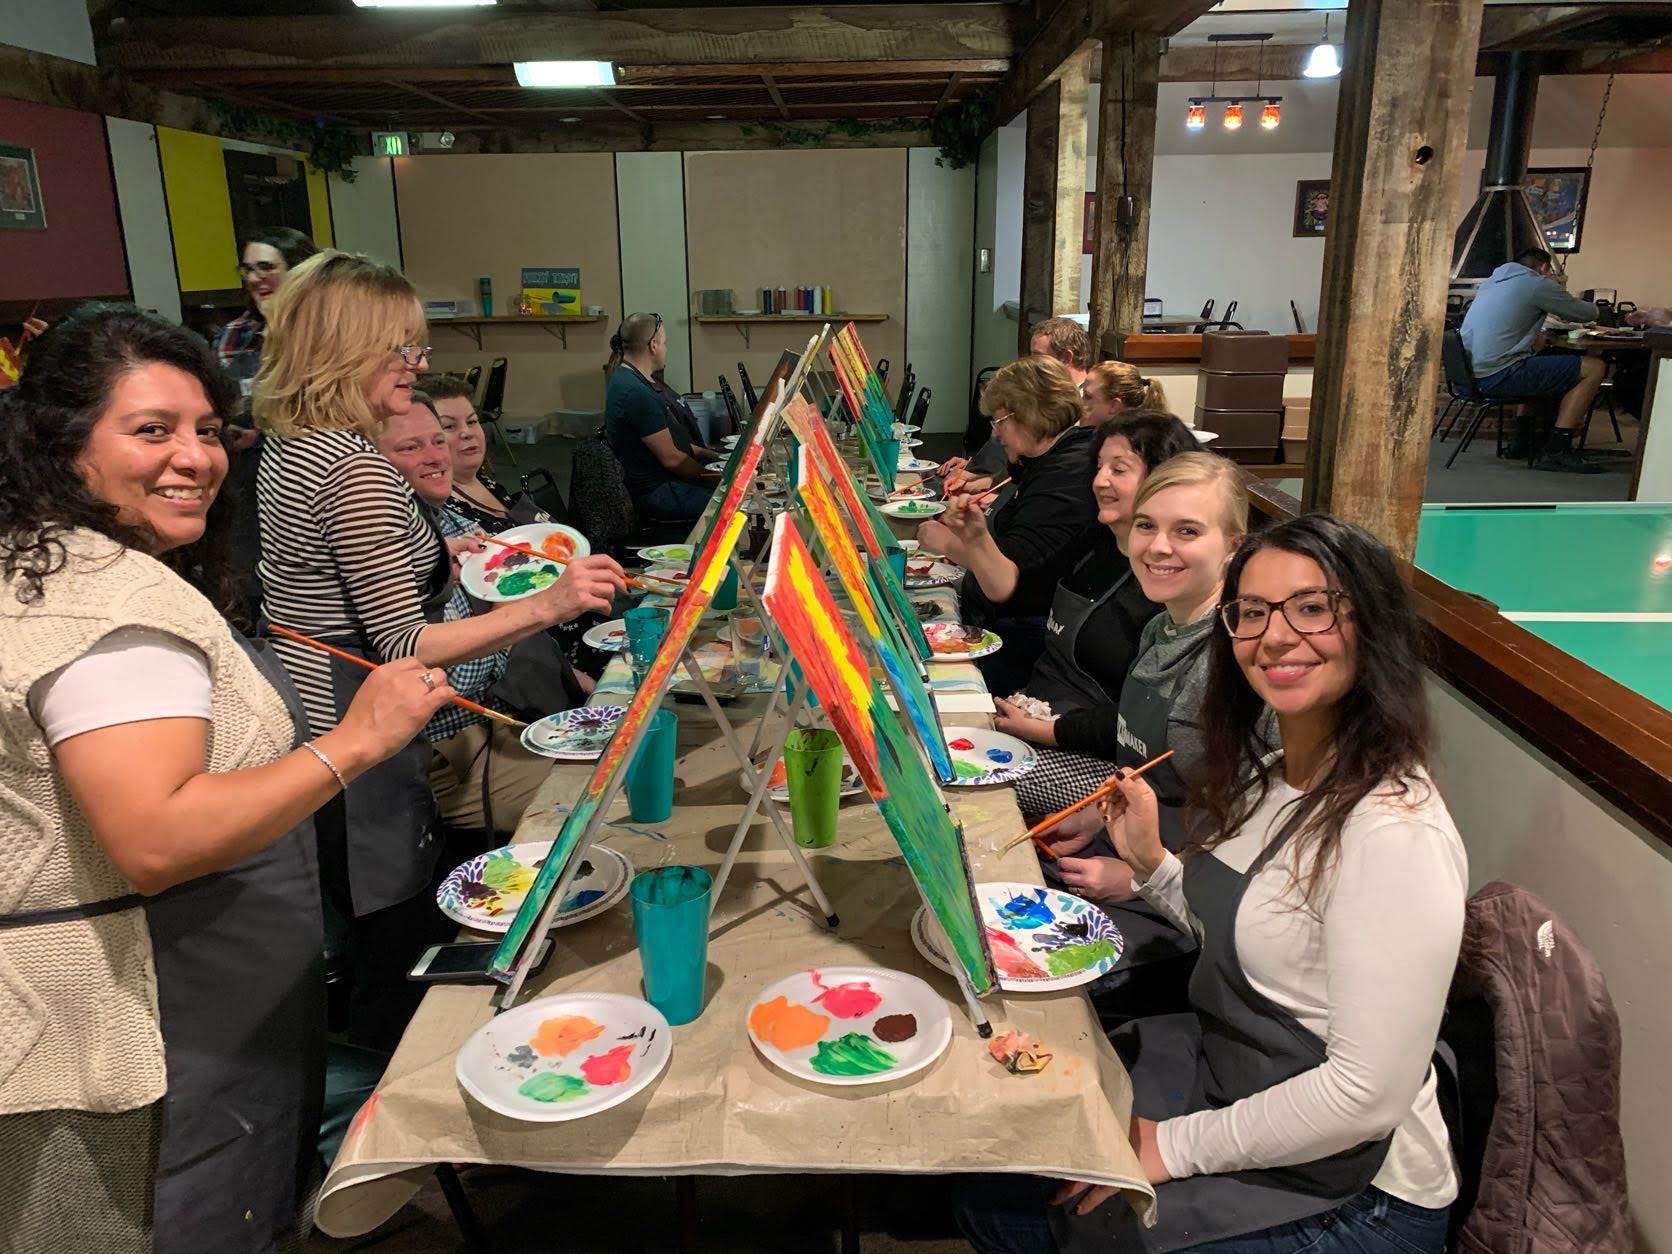 Staff smile at the camera while painting their own canvases at a Paint Night event.